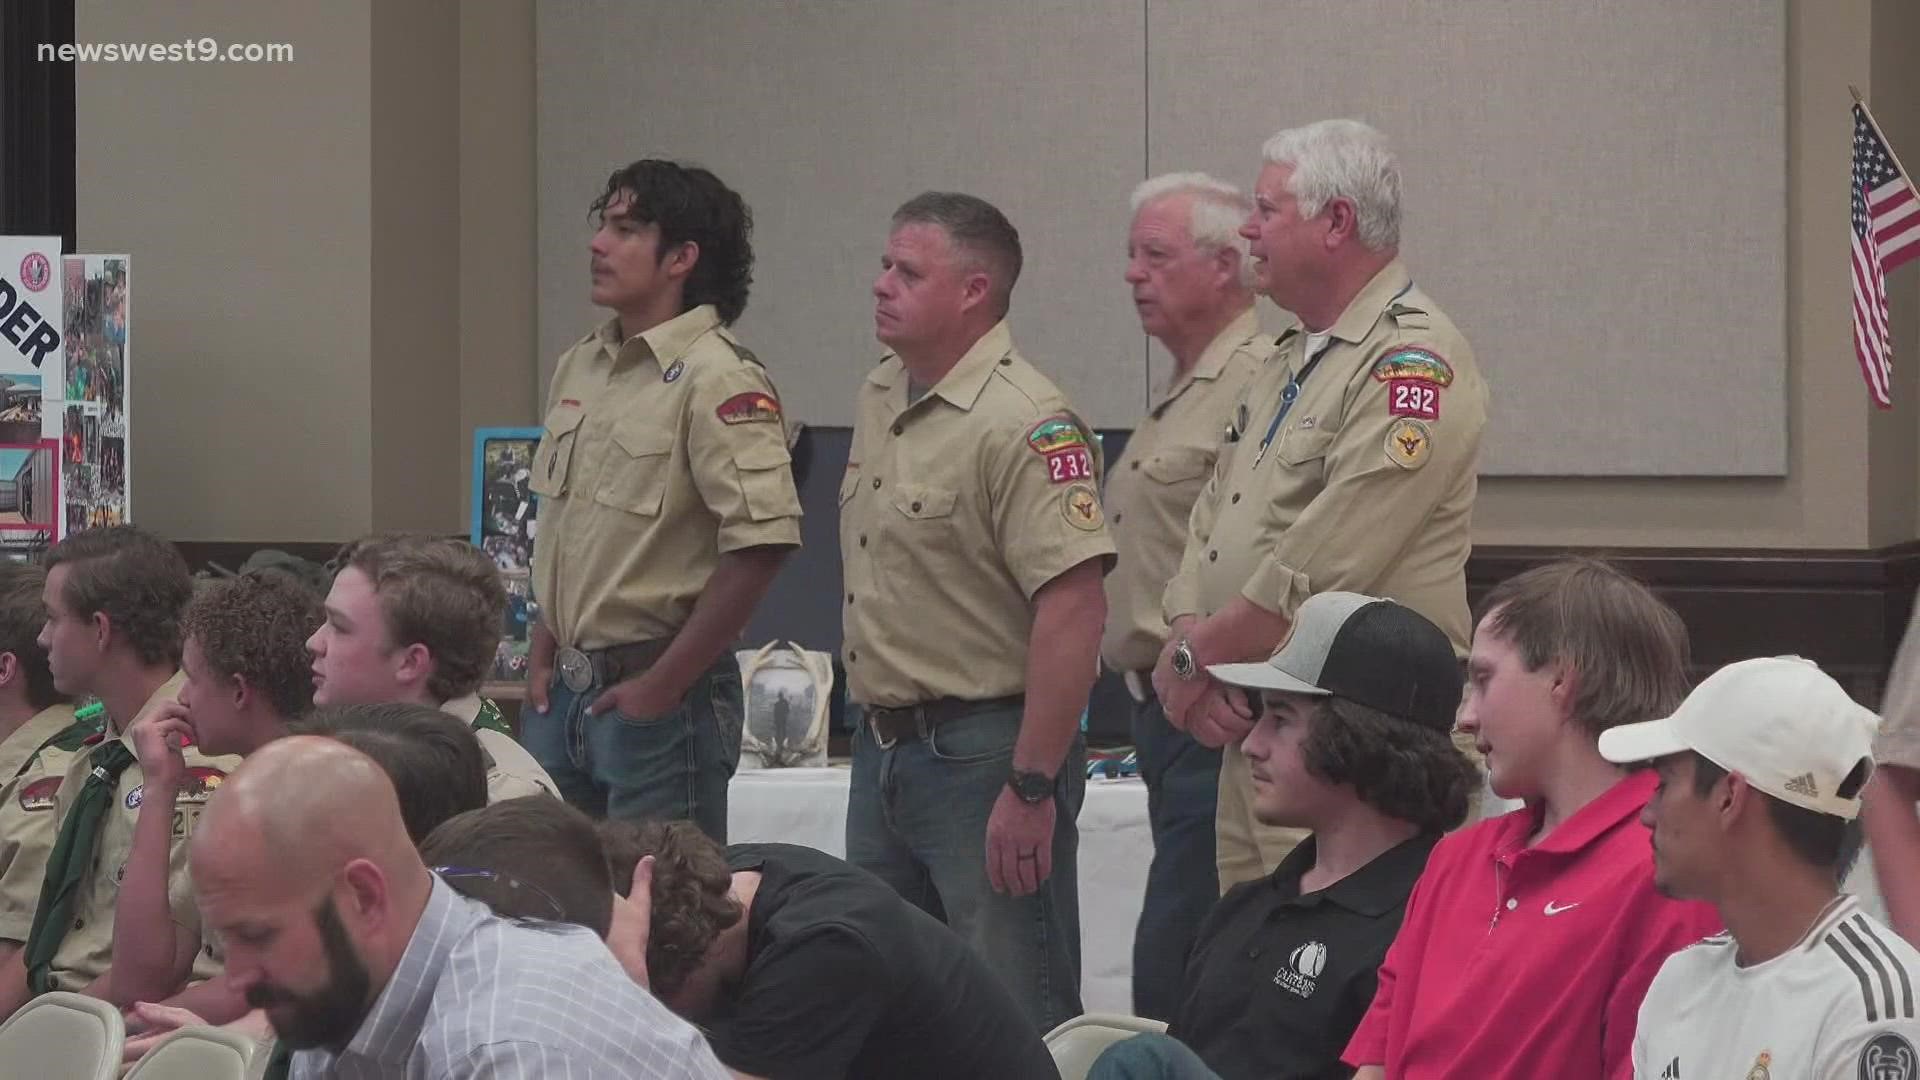 Five boy scouts were promoted during the ceremony to the highest rank in the Boy Scouts.